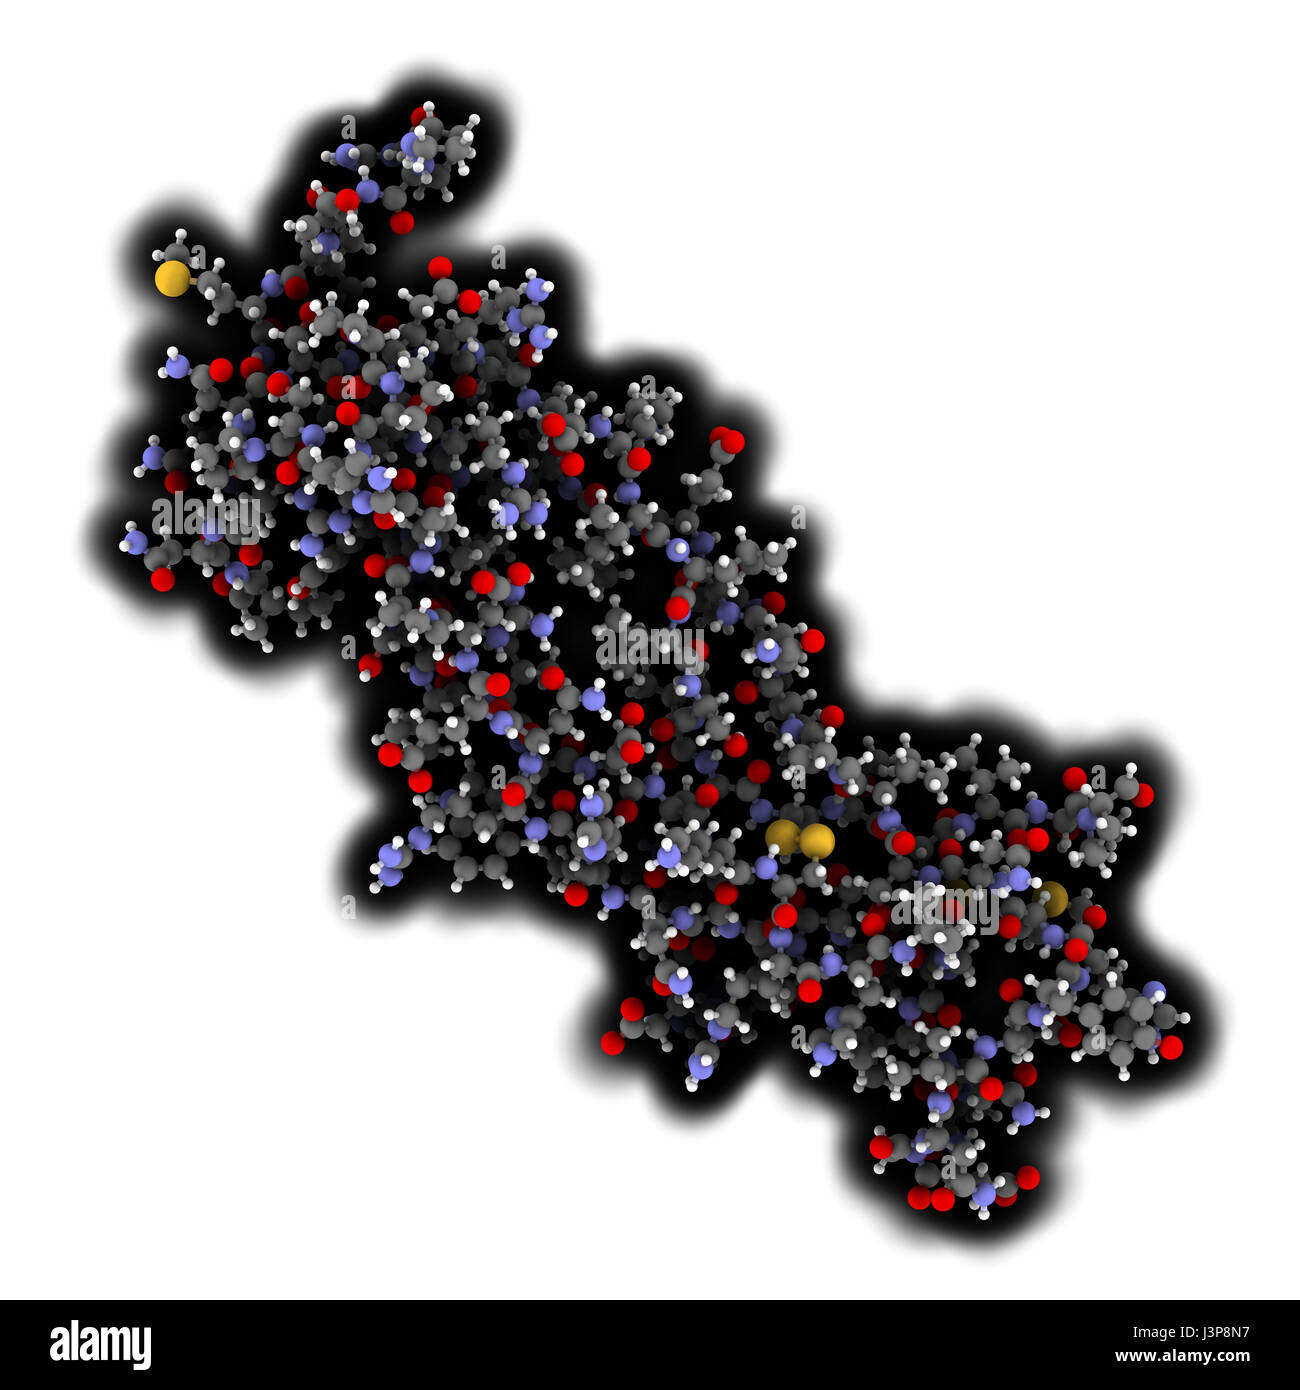 Interleukin 17 (IL-17A, IL-17) cytokine molecule. IL-17 antibodies are evaluated for the treatment of psoriasis and other diseases. Atoms shown as col Stock Photo